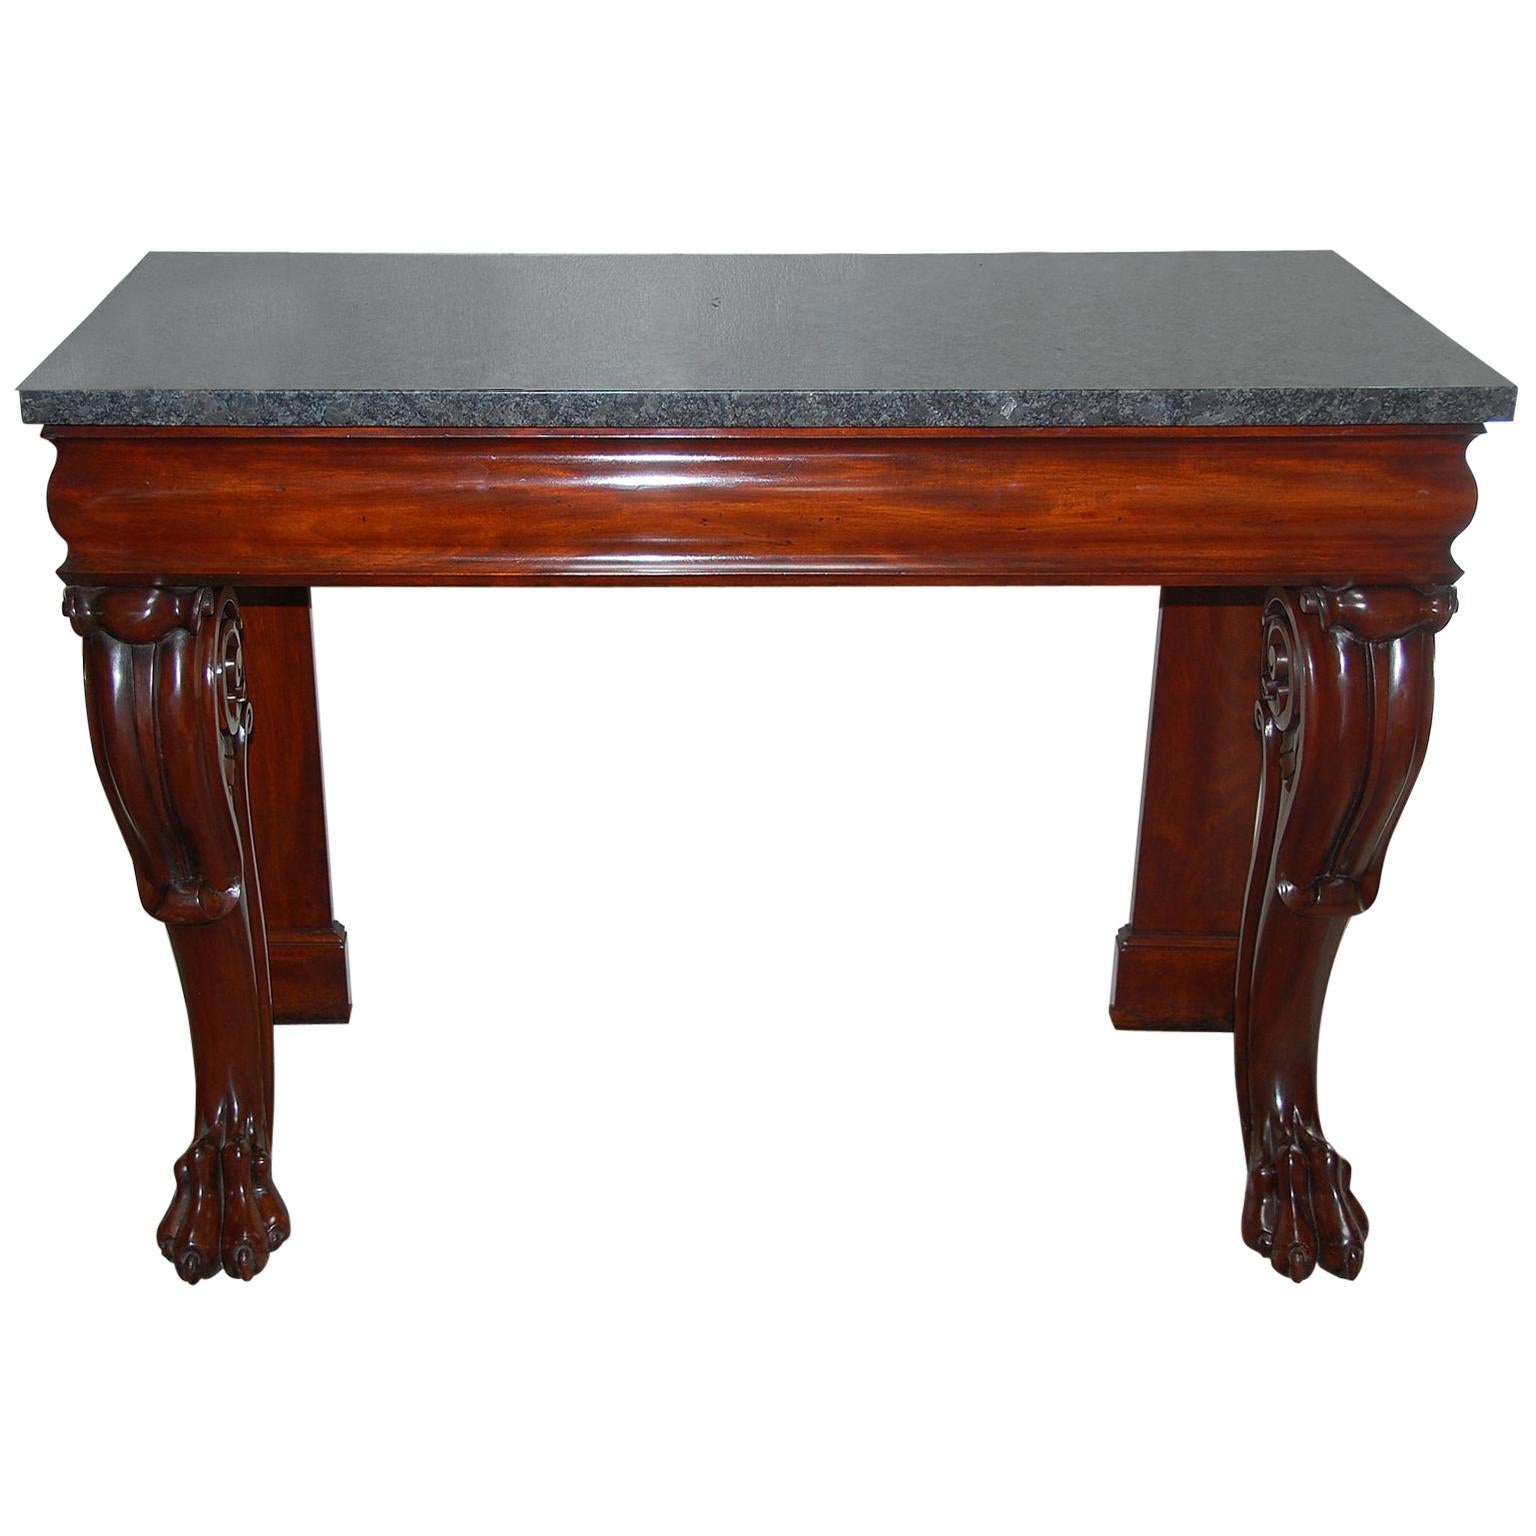 English 19th Century William IV Period Mahogany Console Table with Marble Top